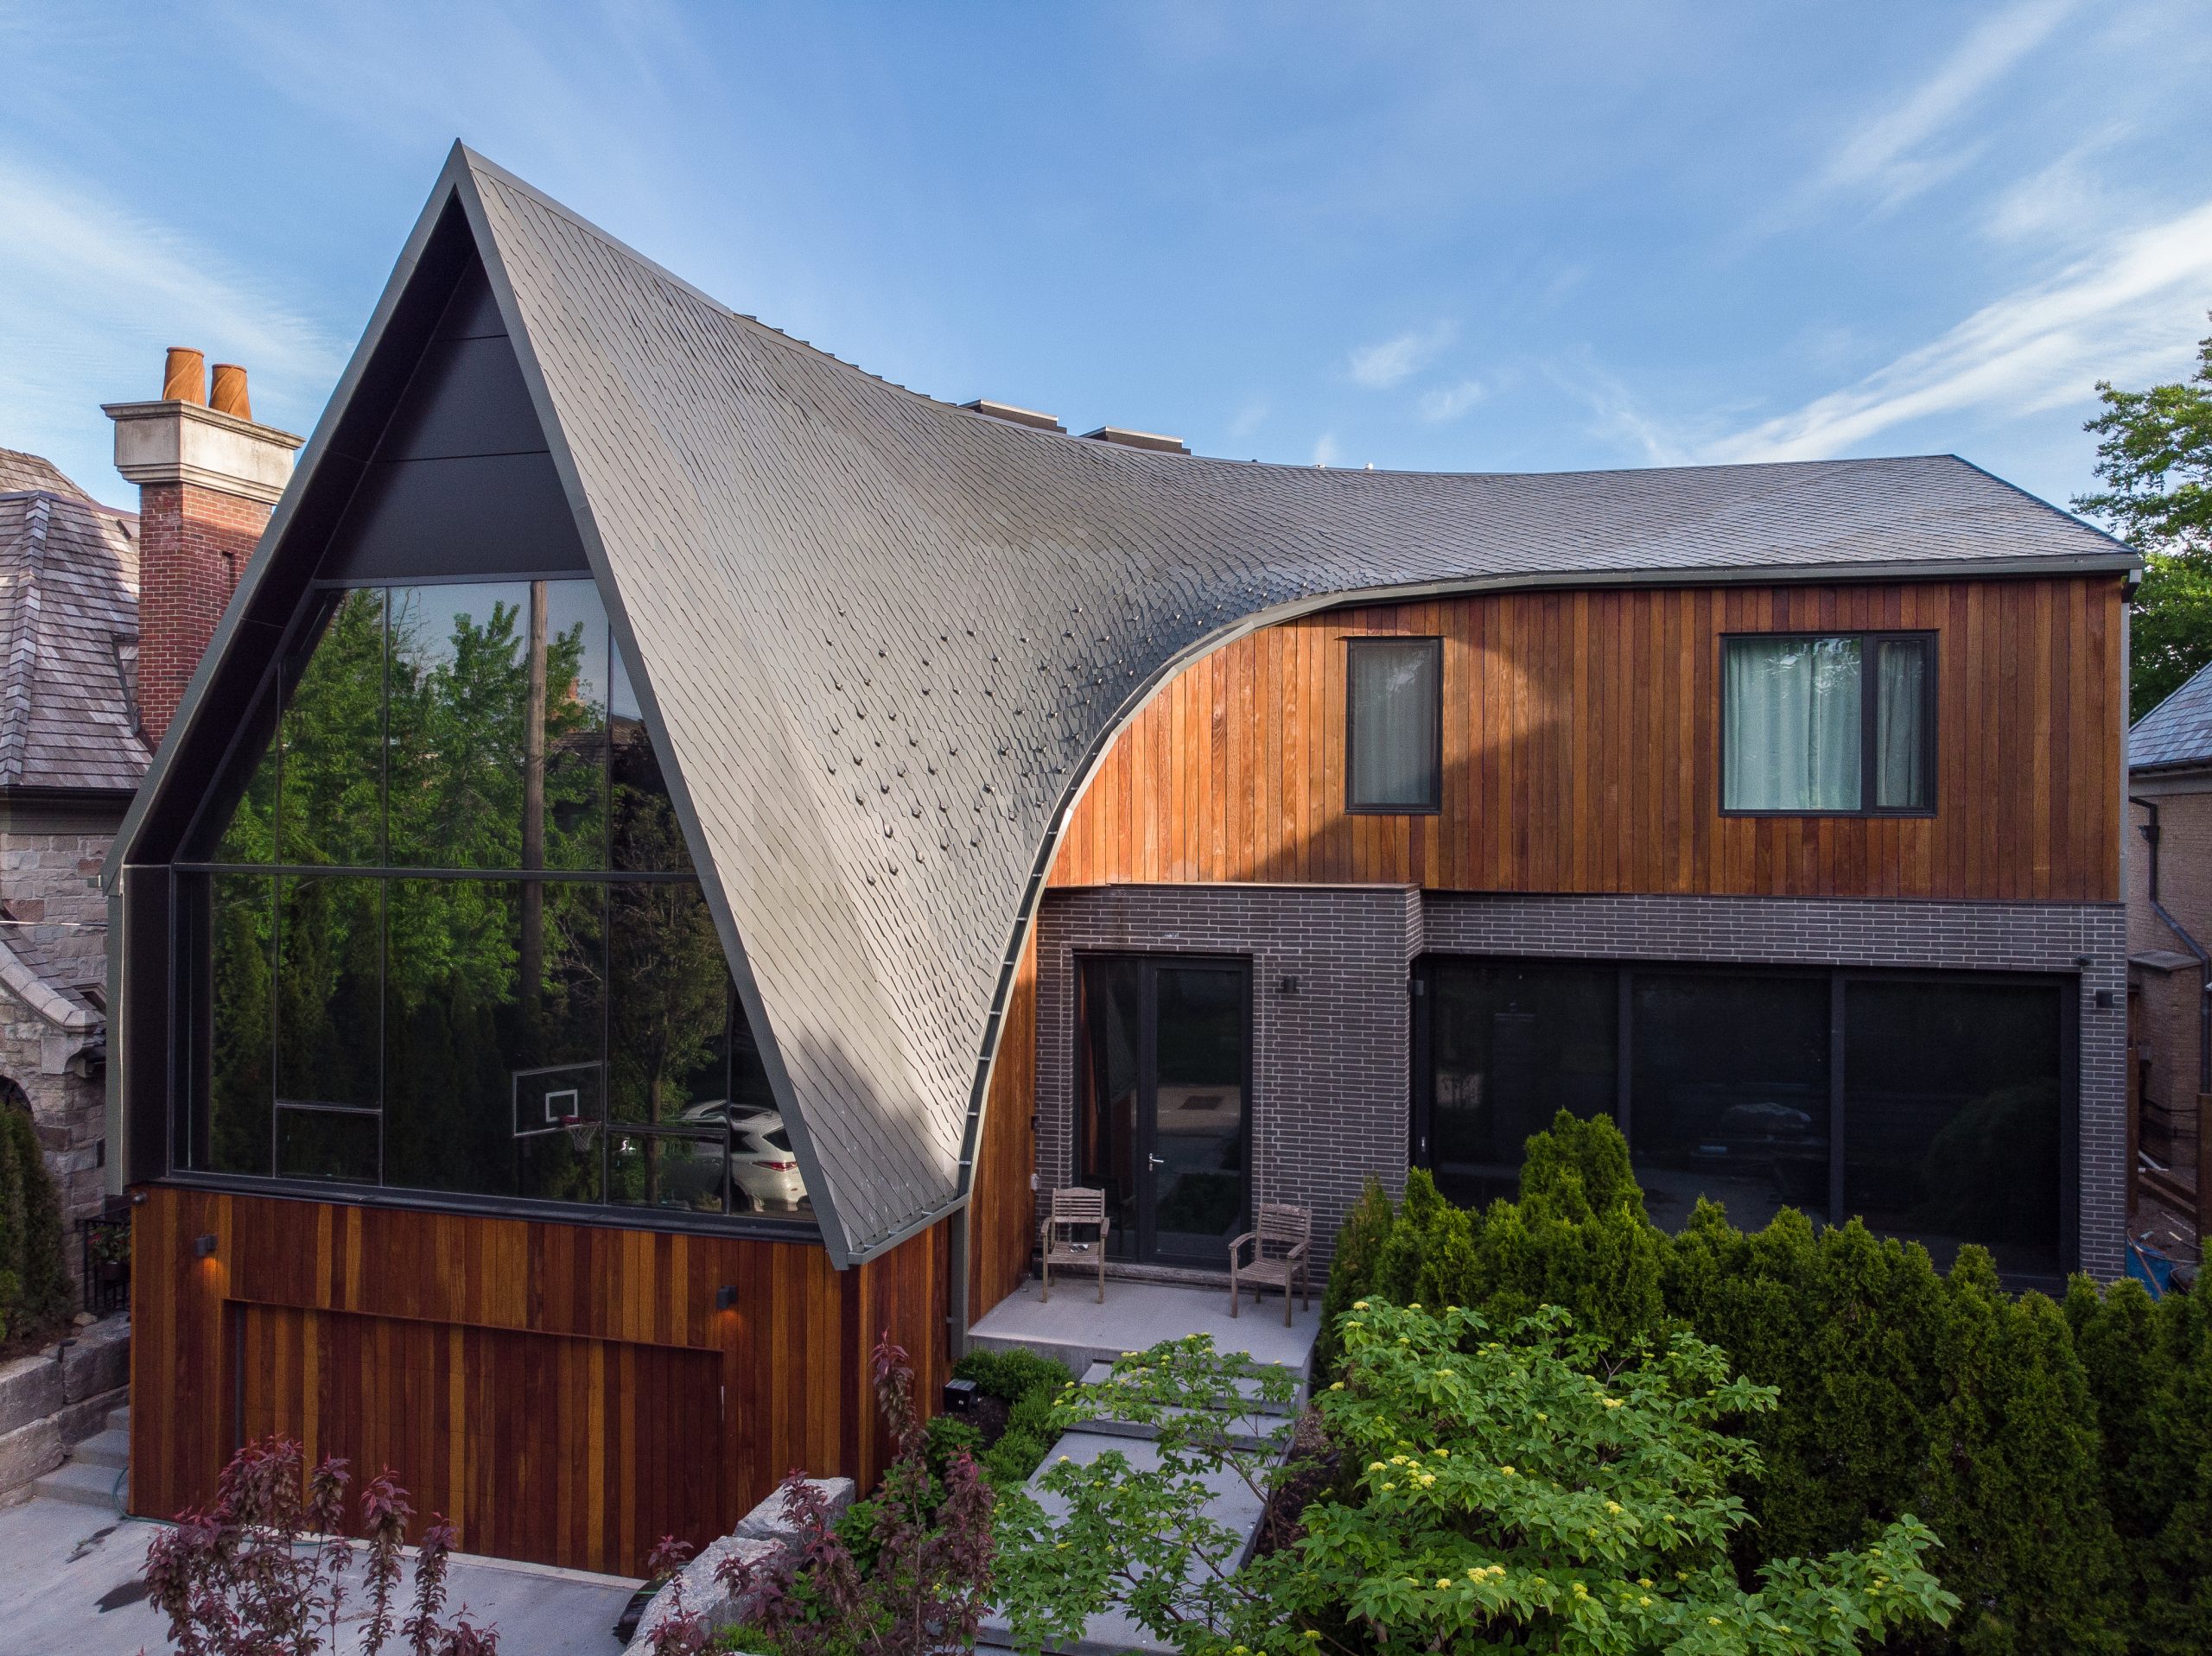 Roofing With Imagination: A-frame Gets a Dragon-Scale Topper